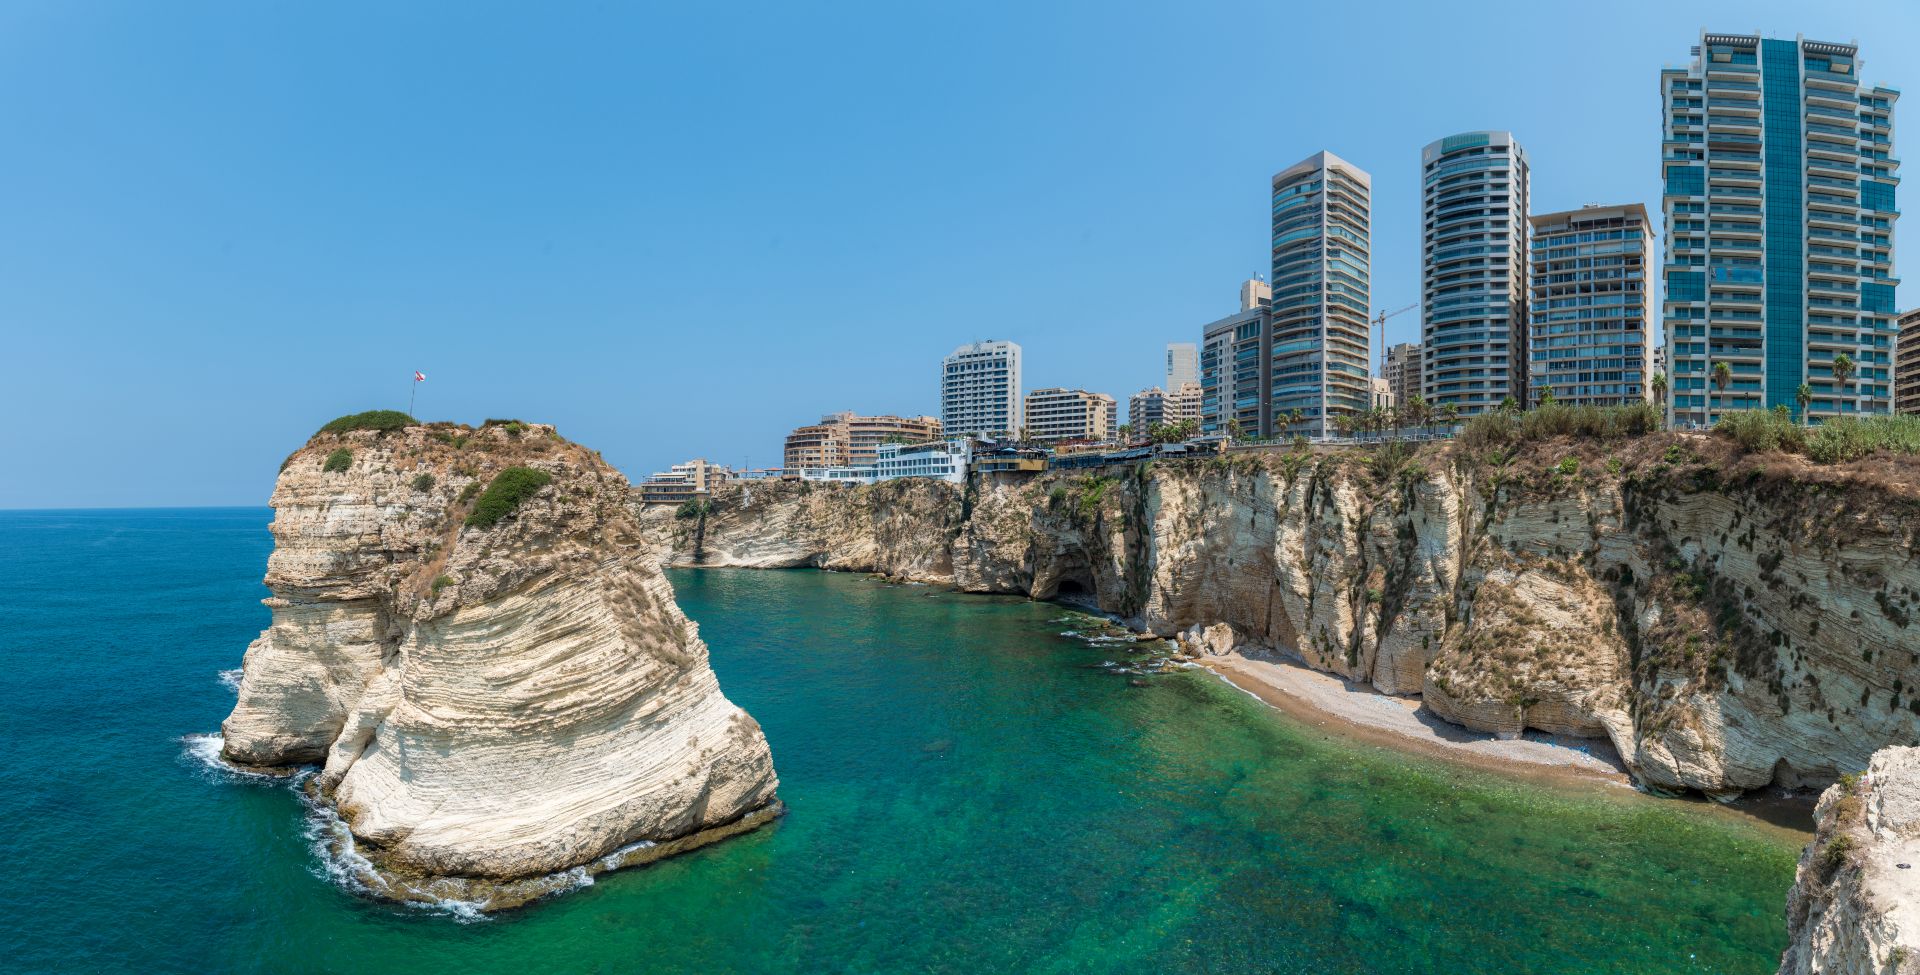 Skyline and Rouche Rocks in Beirut